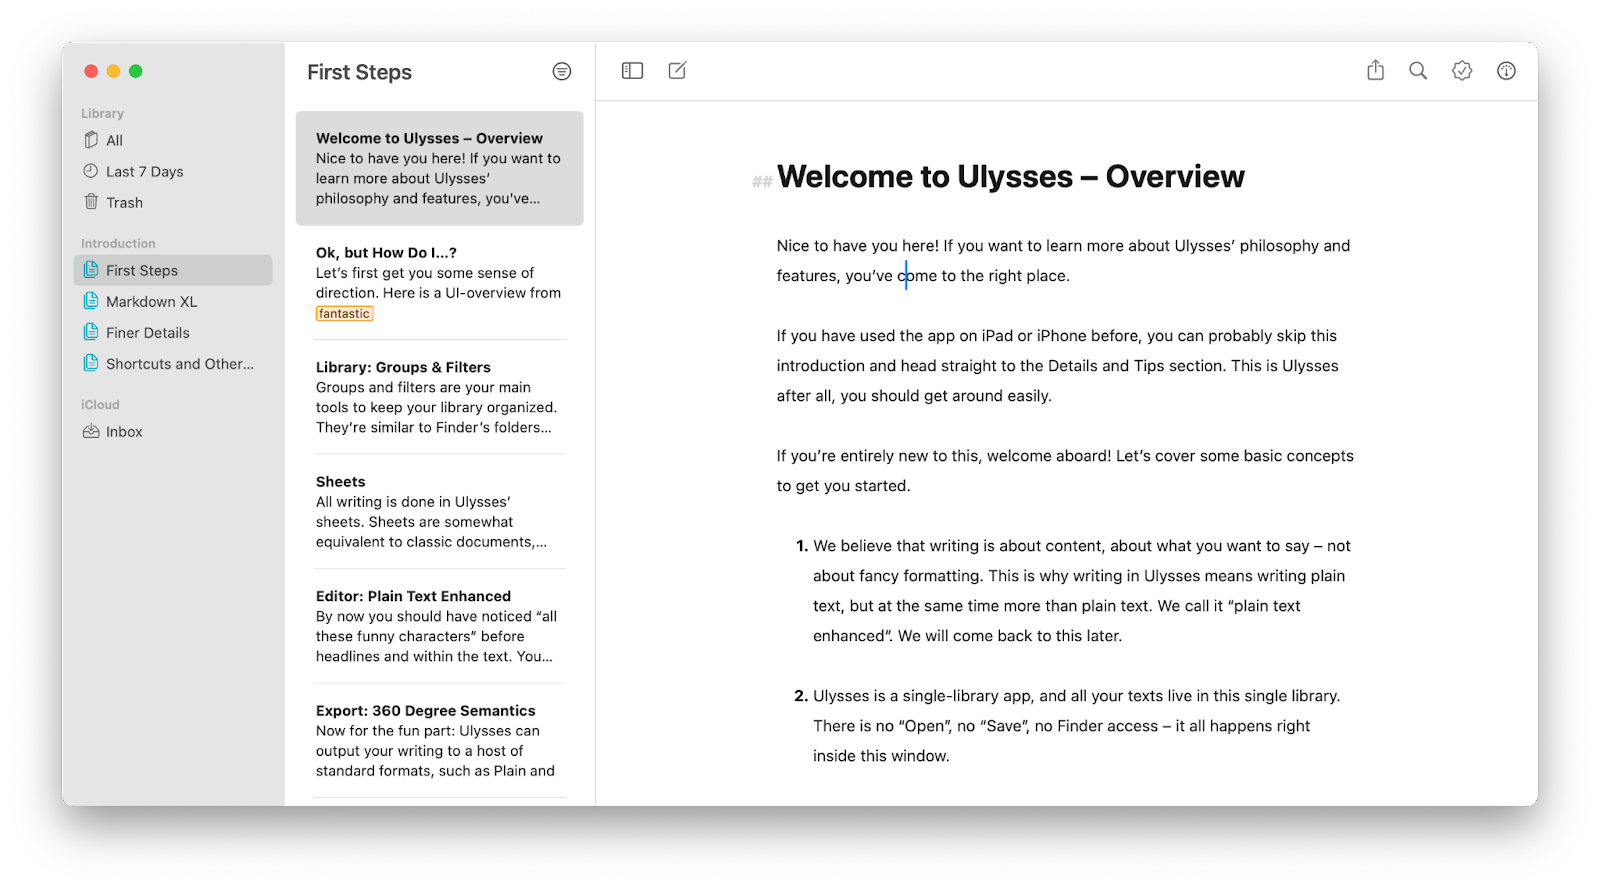 Ulysses syncs texts automatically